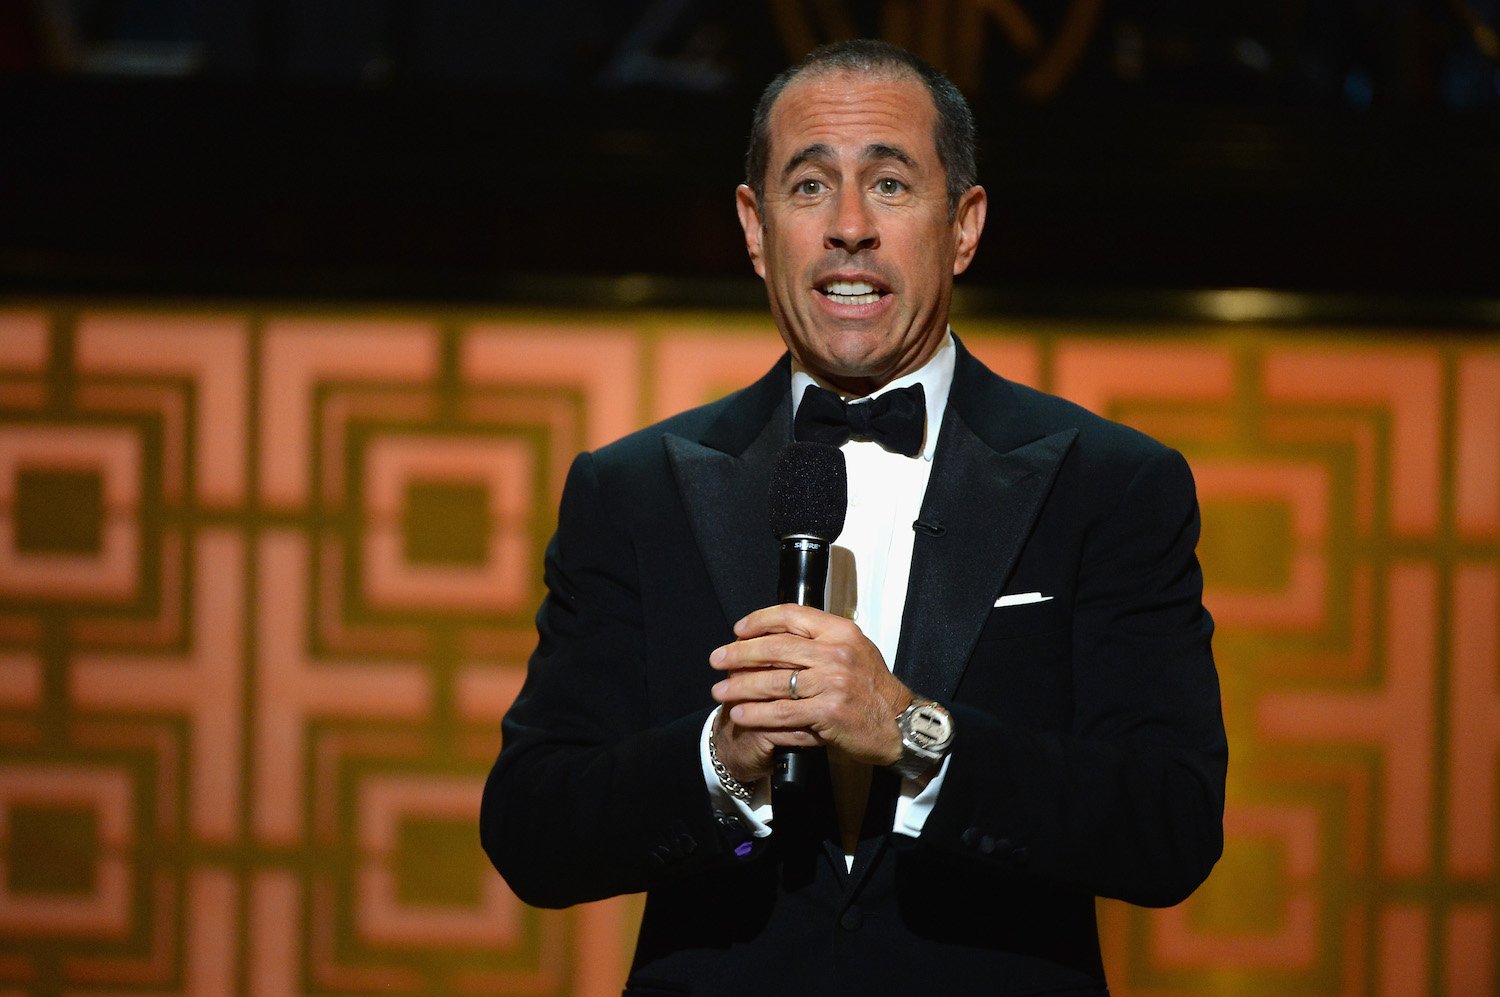 Jerry Seinfeld on stage.